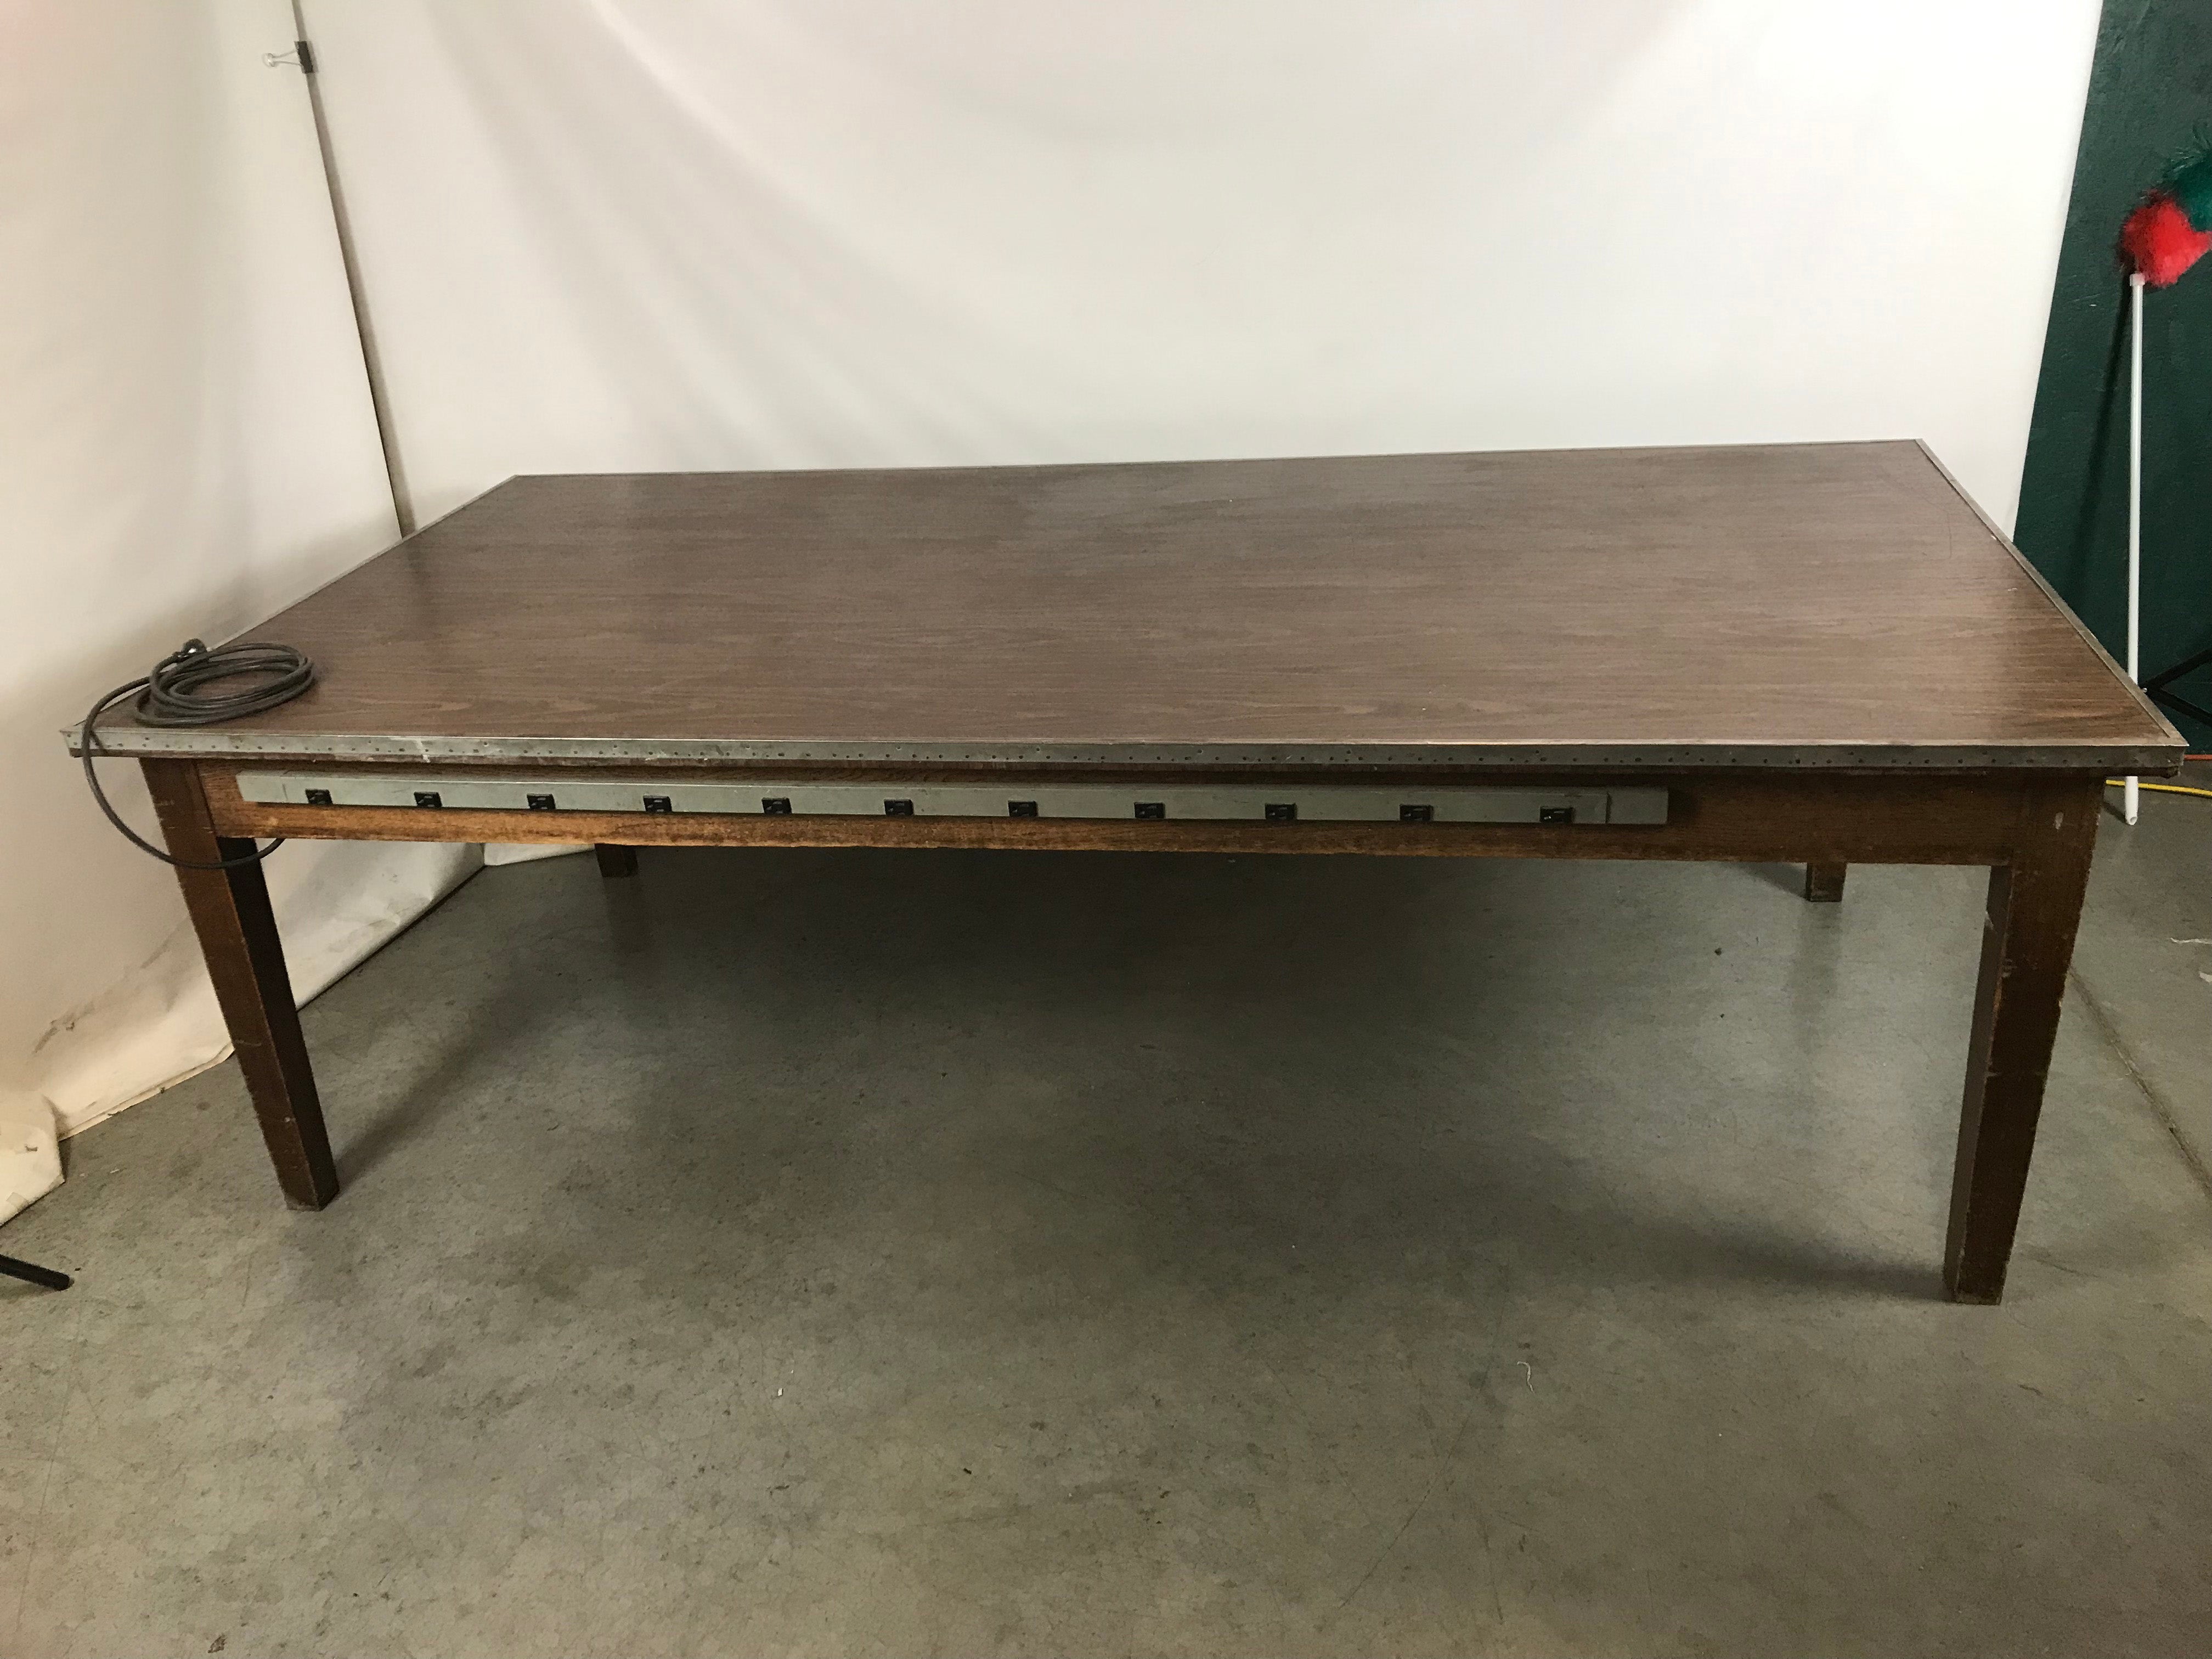 Large 96x48 Wood Electrical Table